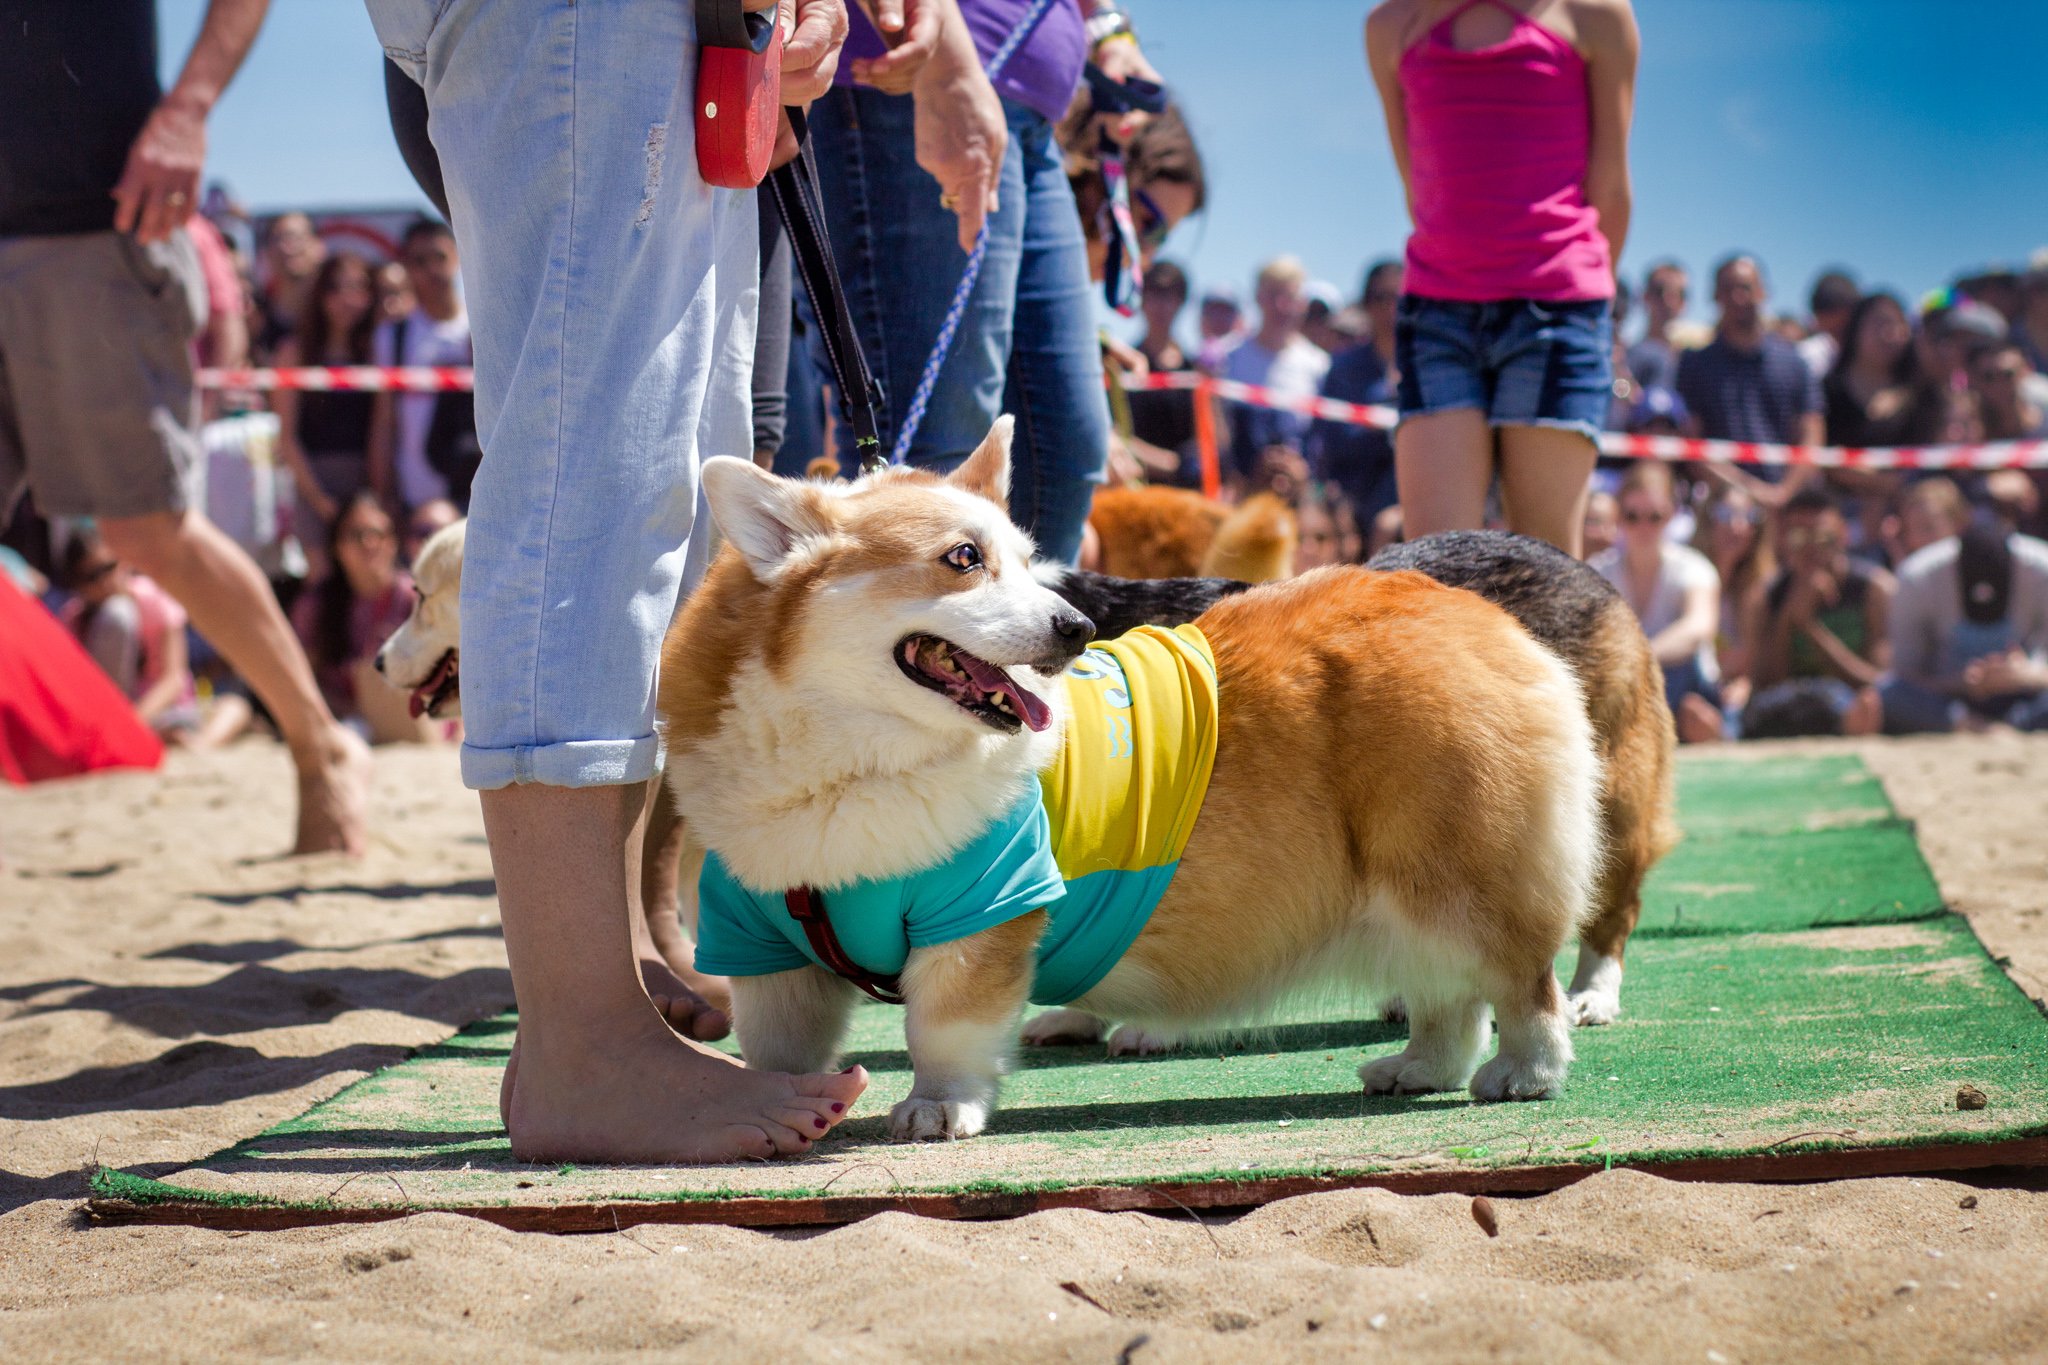 Orange County Pet and Dog Photography - by Steamer Lee - Corgi Beach Day Spring 2019 - Southern Caliornia 19 (1).JPG